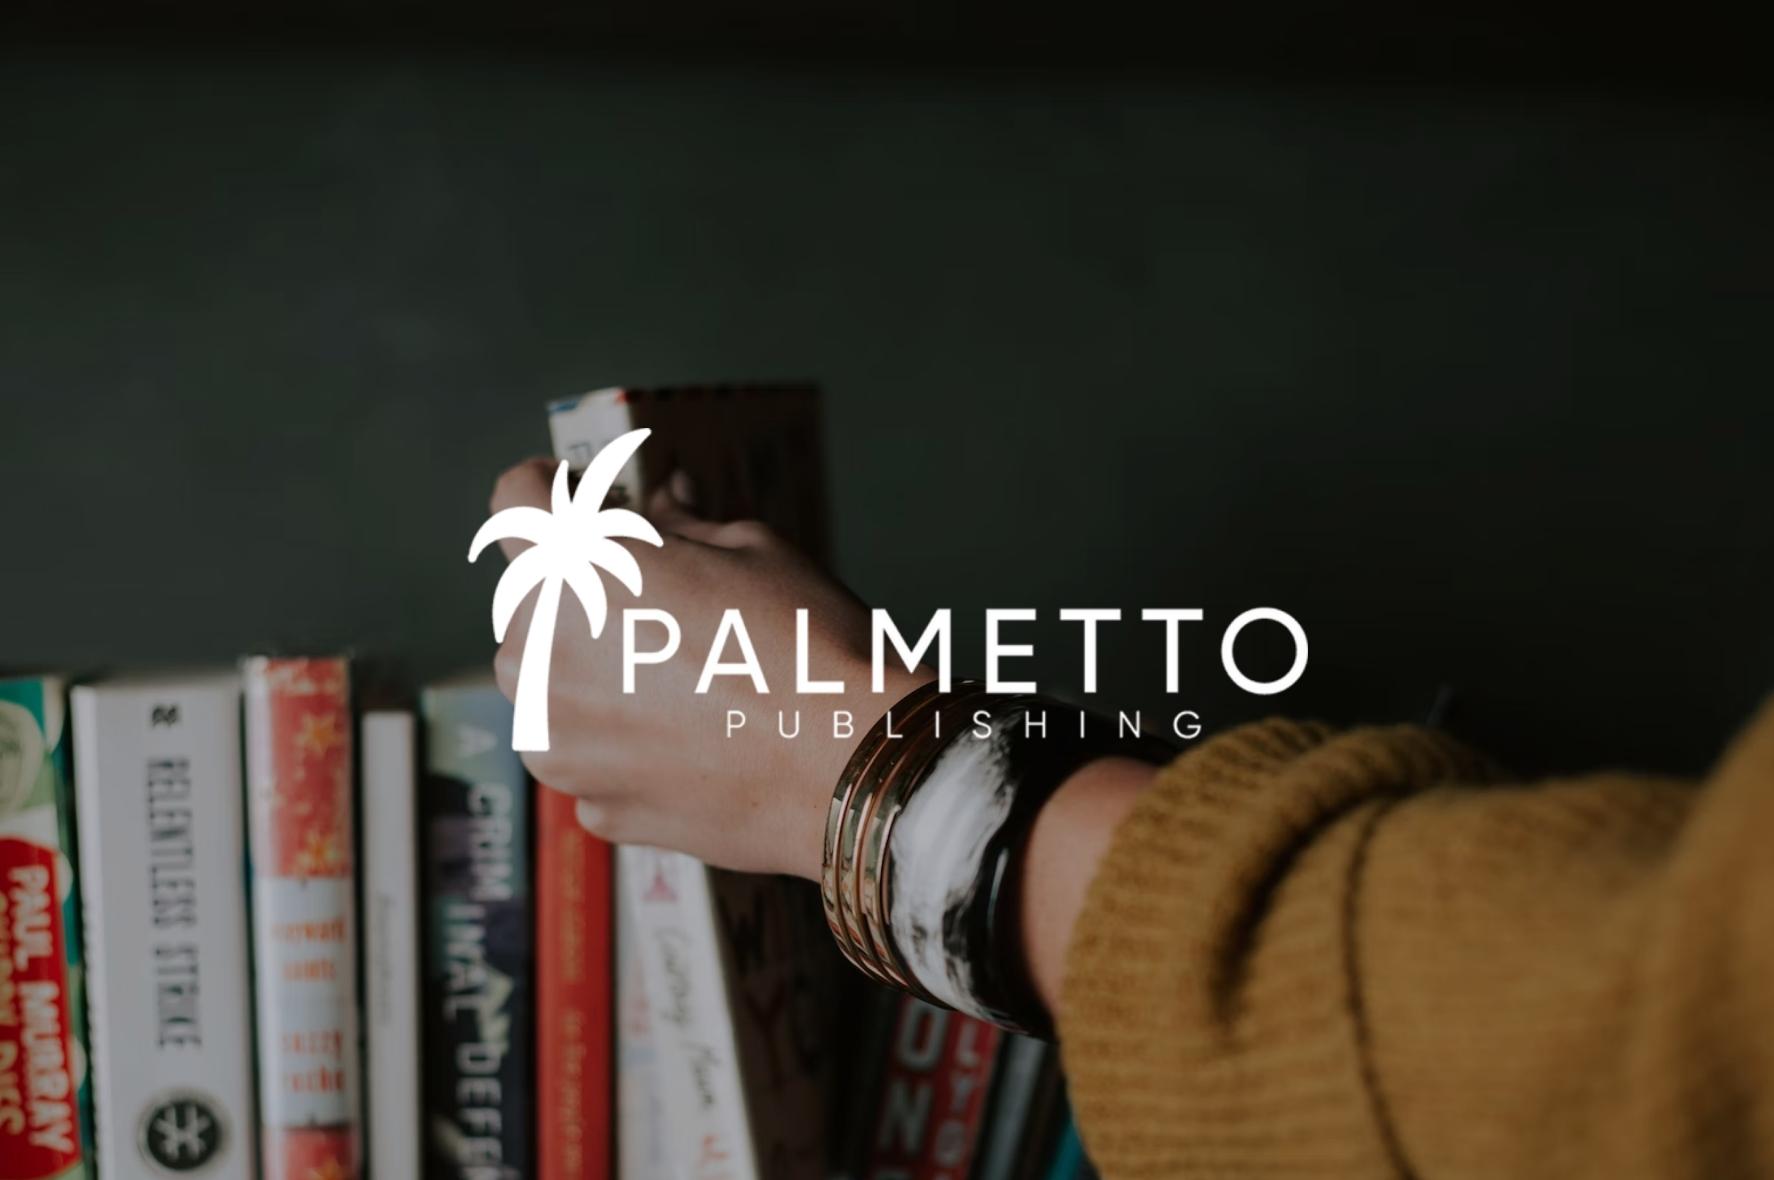 Lineout case study showing SEO, SEM, CRO, and web design results for Palmetto Publishing.